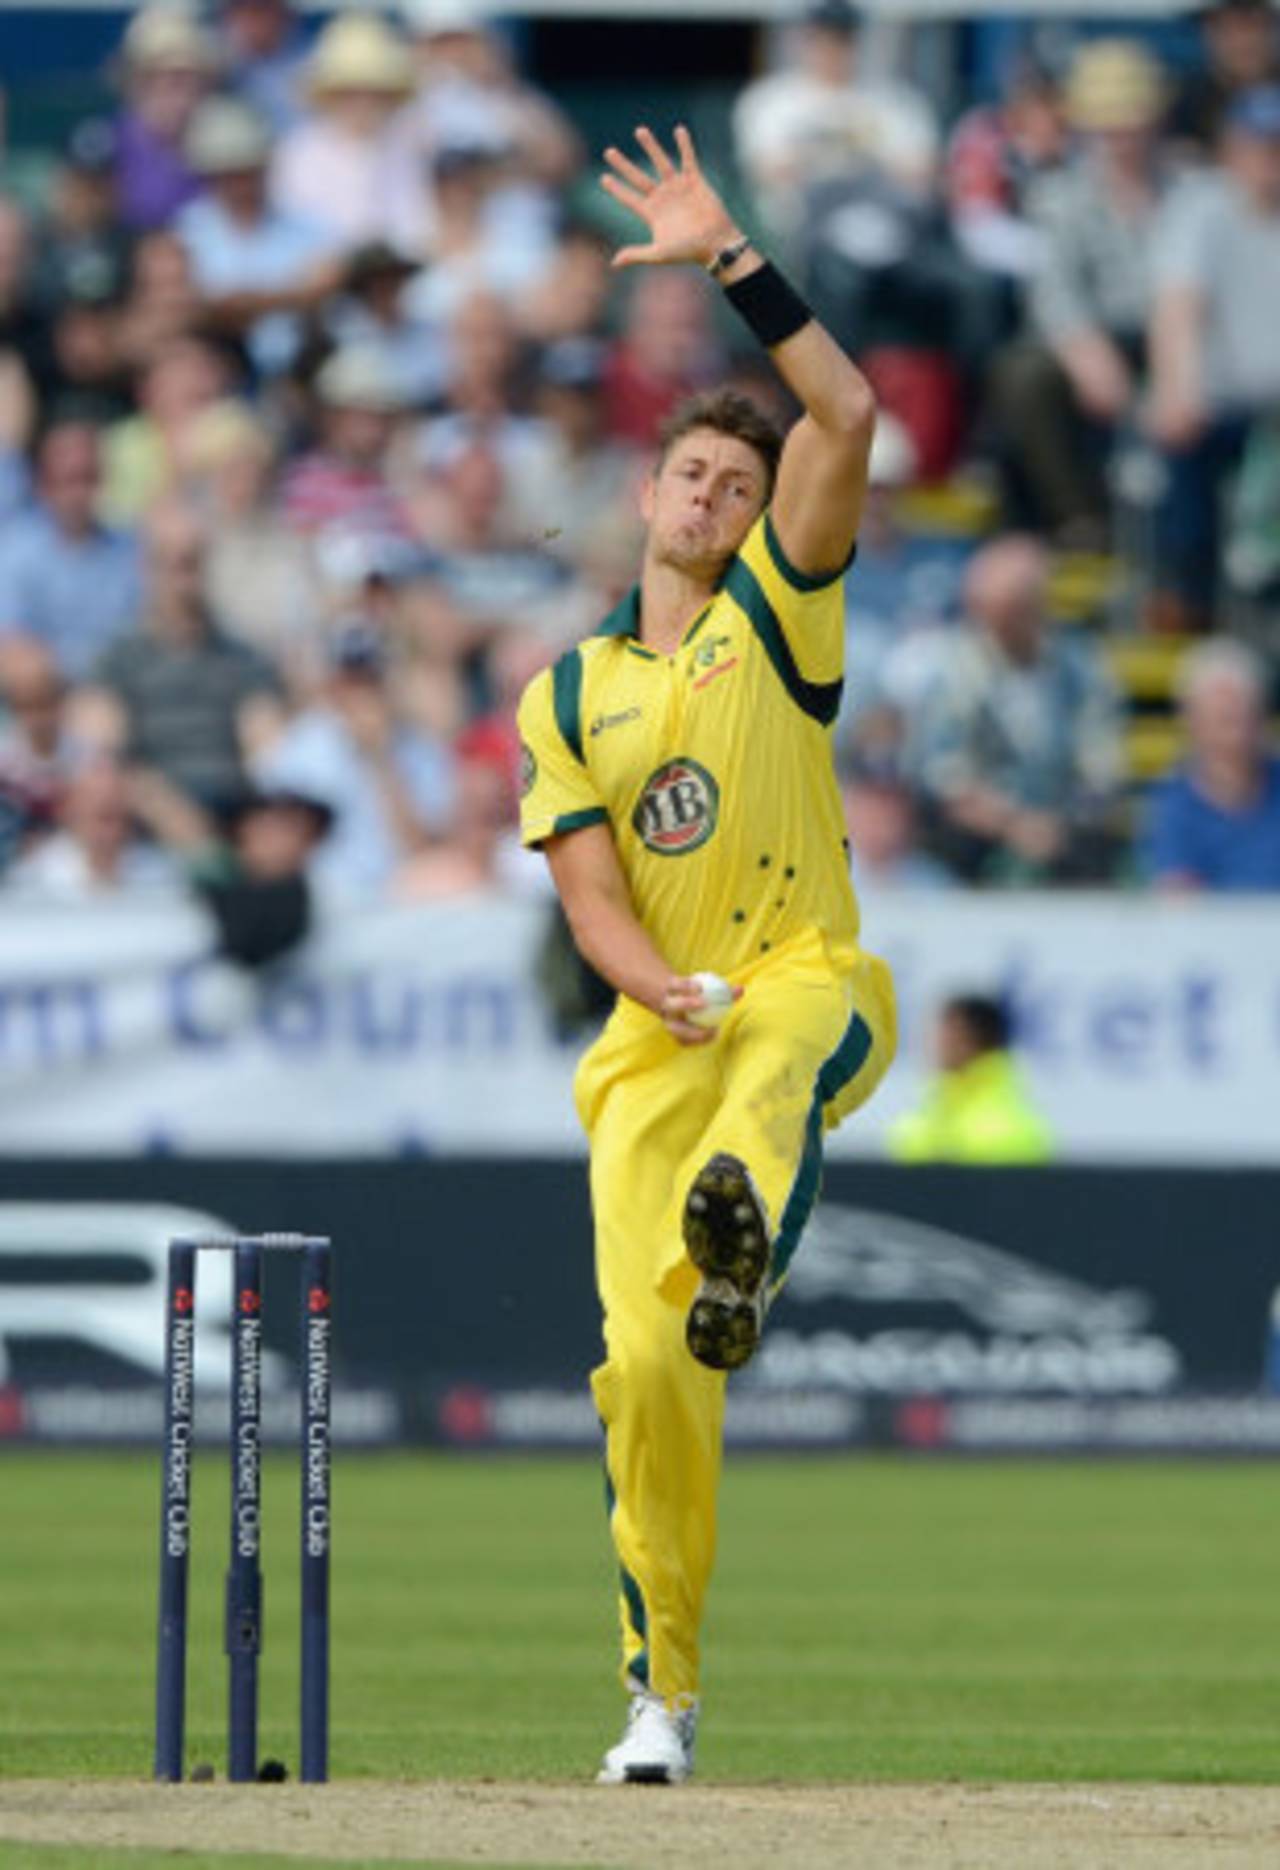 There was considerable weight on James Pattinson's shoulders as Australia's attack slumped&nbsp;&nbsp;&bull;&nbsp;&nbsp;Getty Images